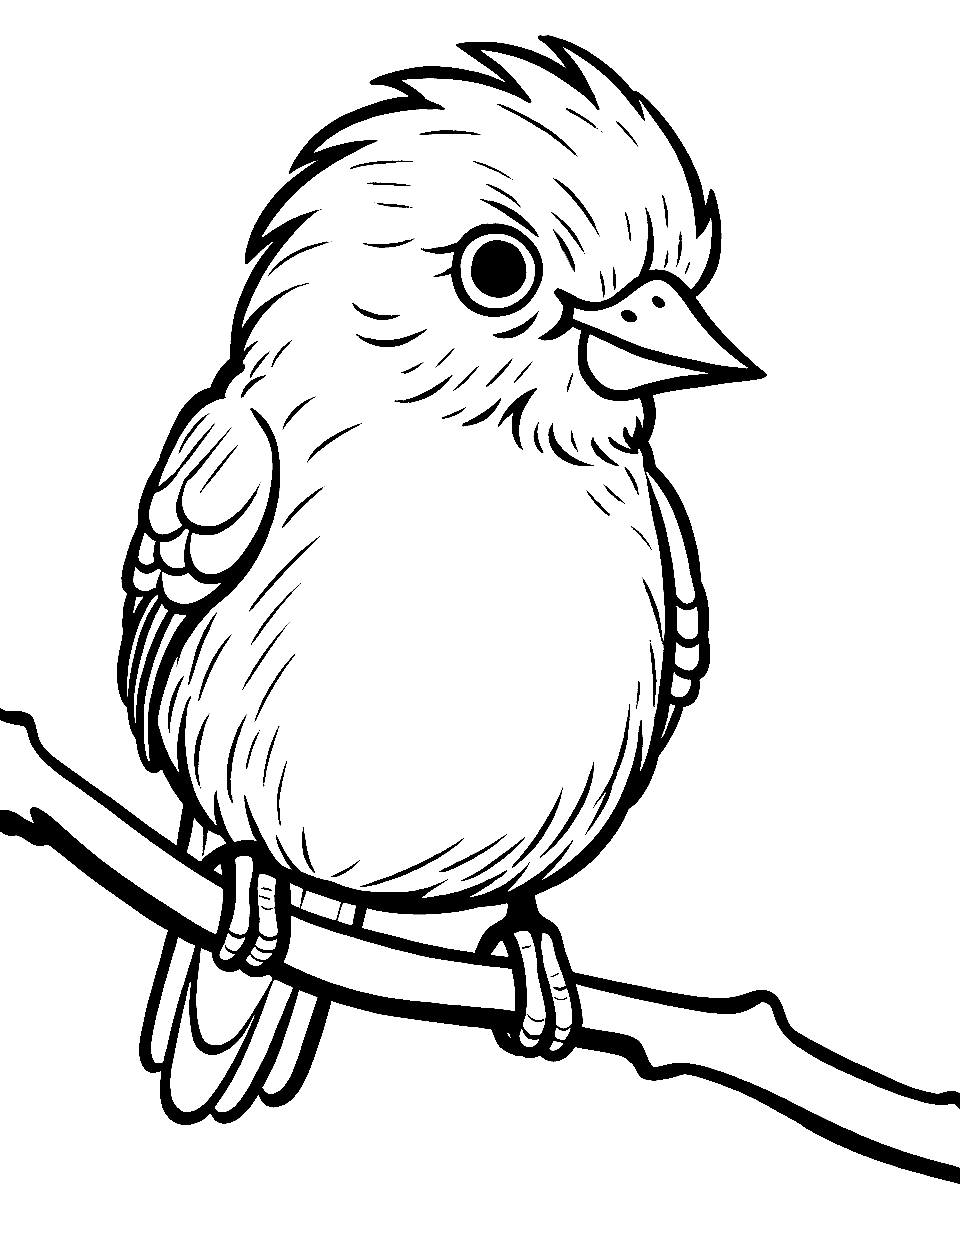 Simple Outline Sketch Of Cockatoo Bird At Tree Stock Photo, Picture and  Royalty Free Image. Image 94263767.